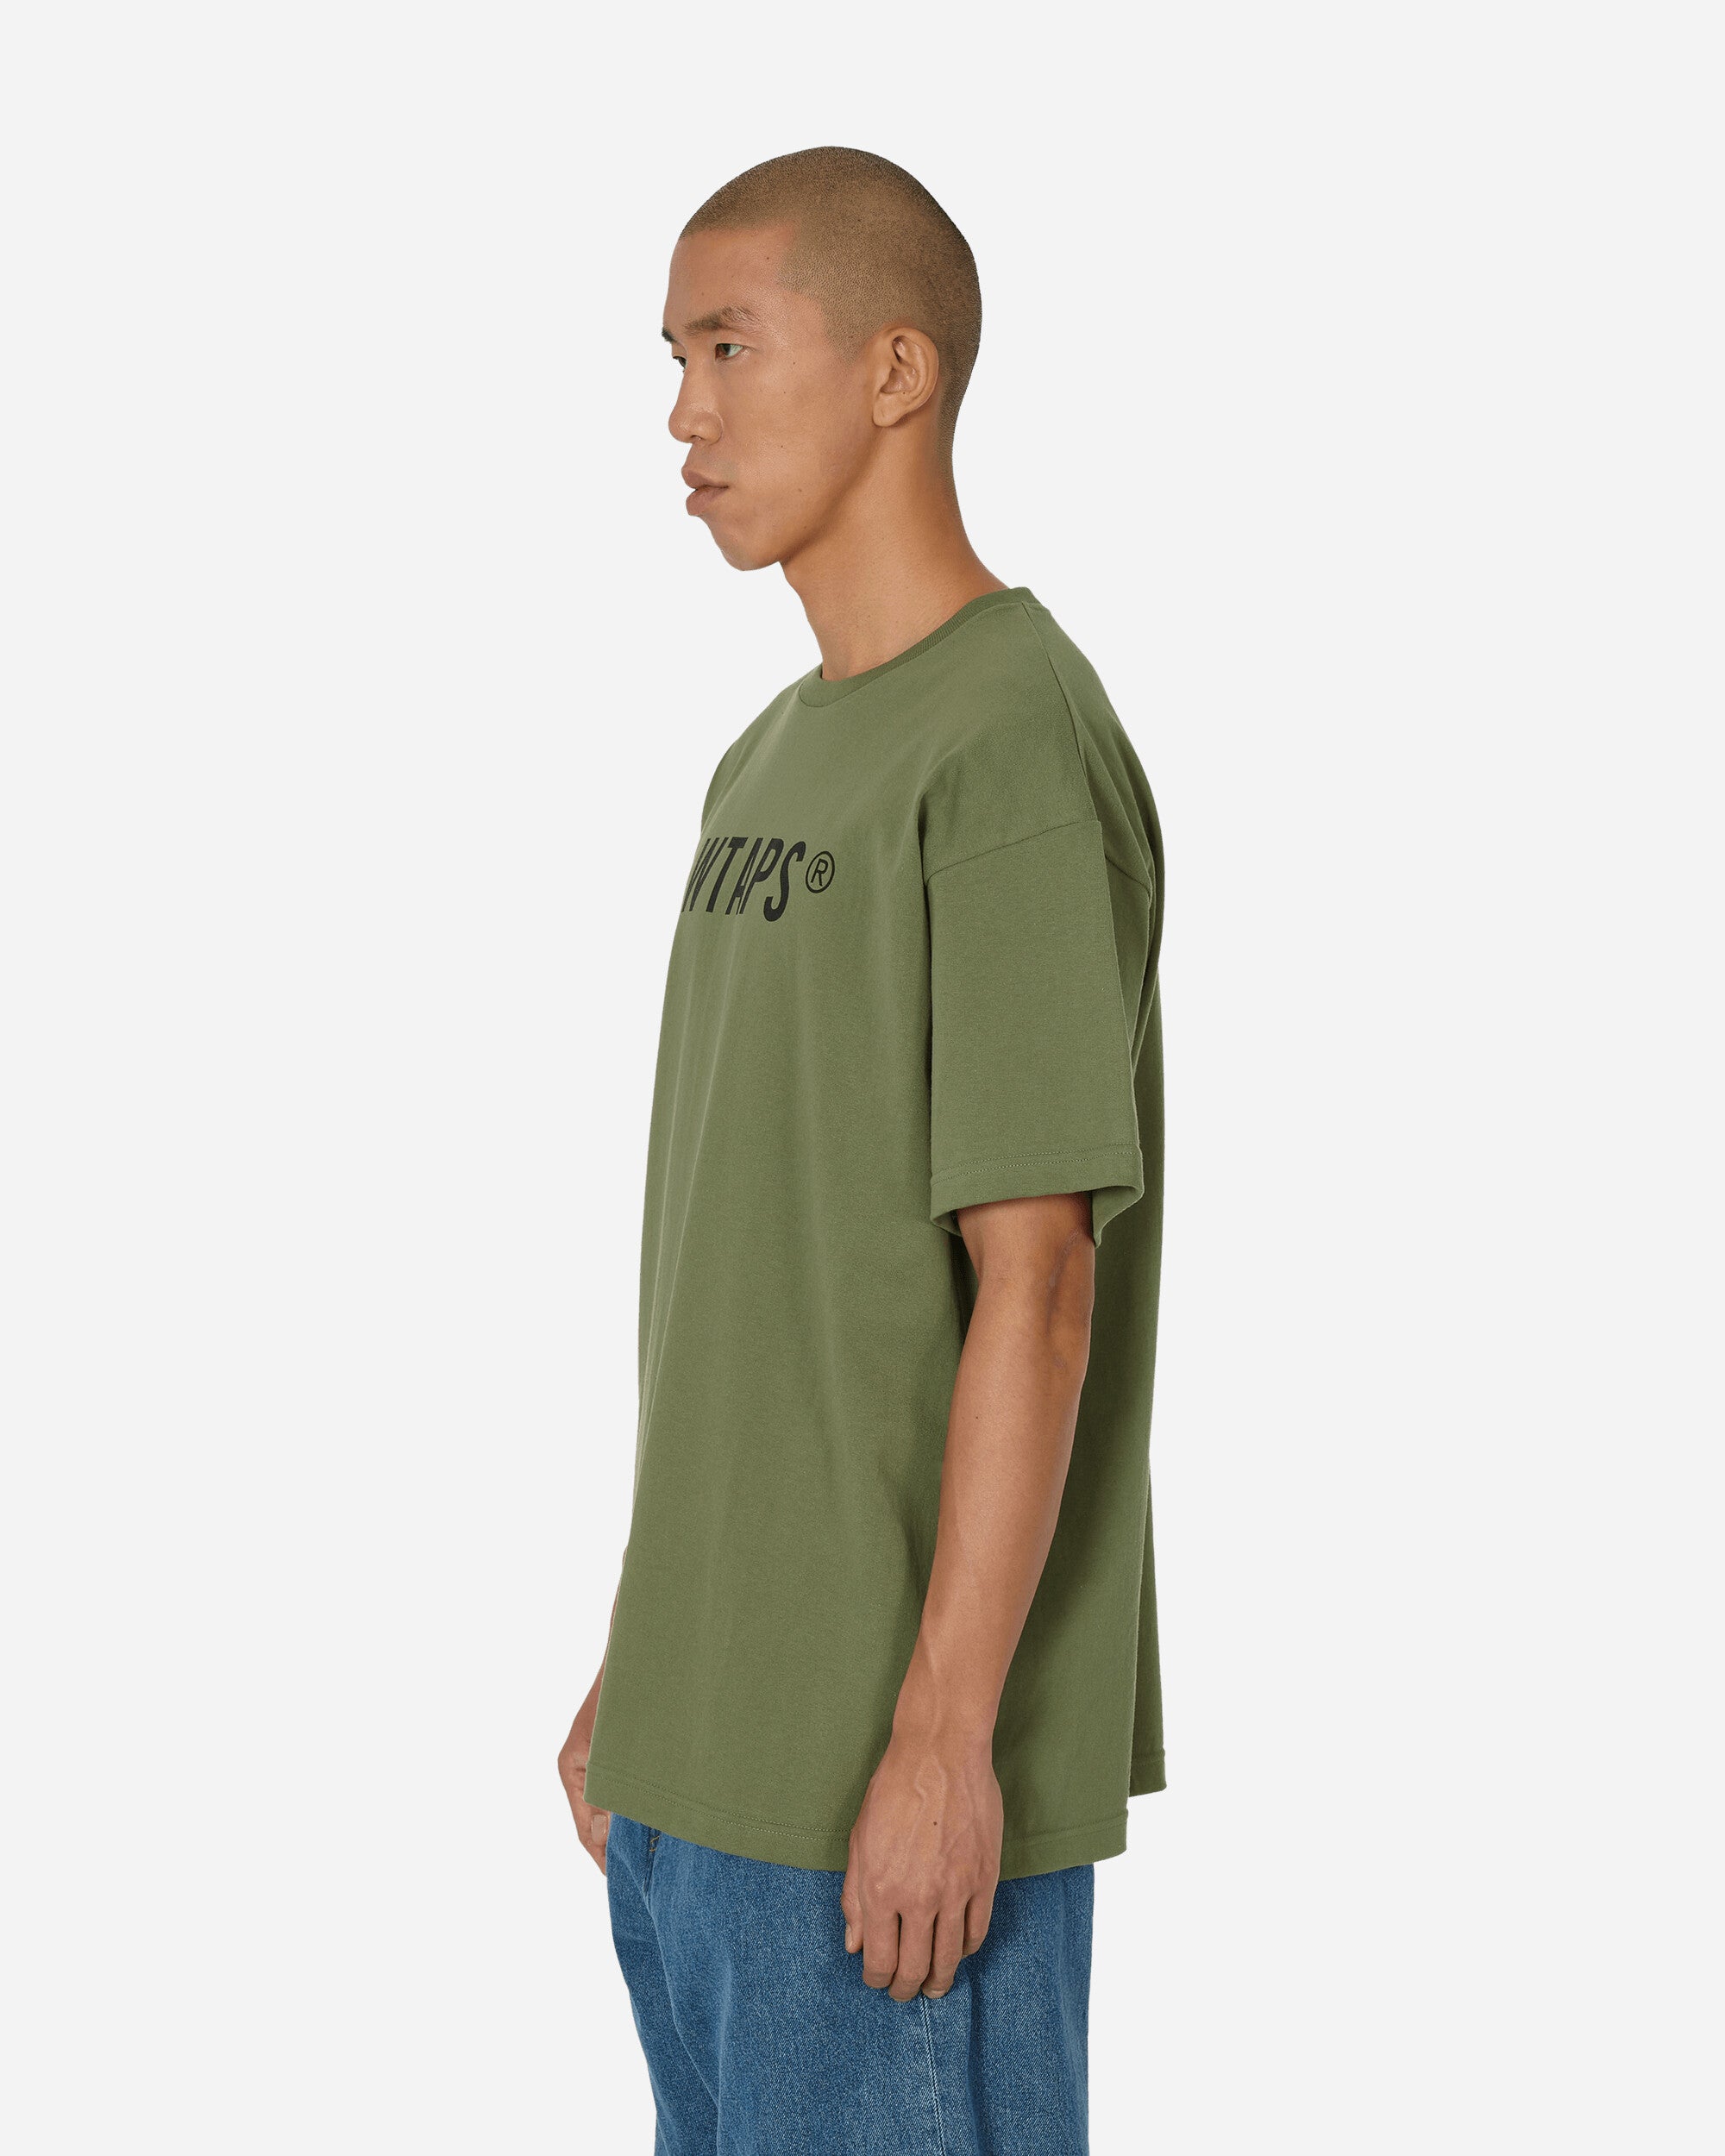 WTAPS GHILL SS COTTON OLIVE DRABS使用状況